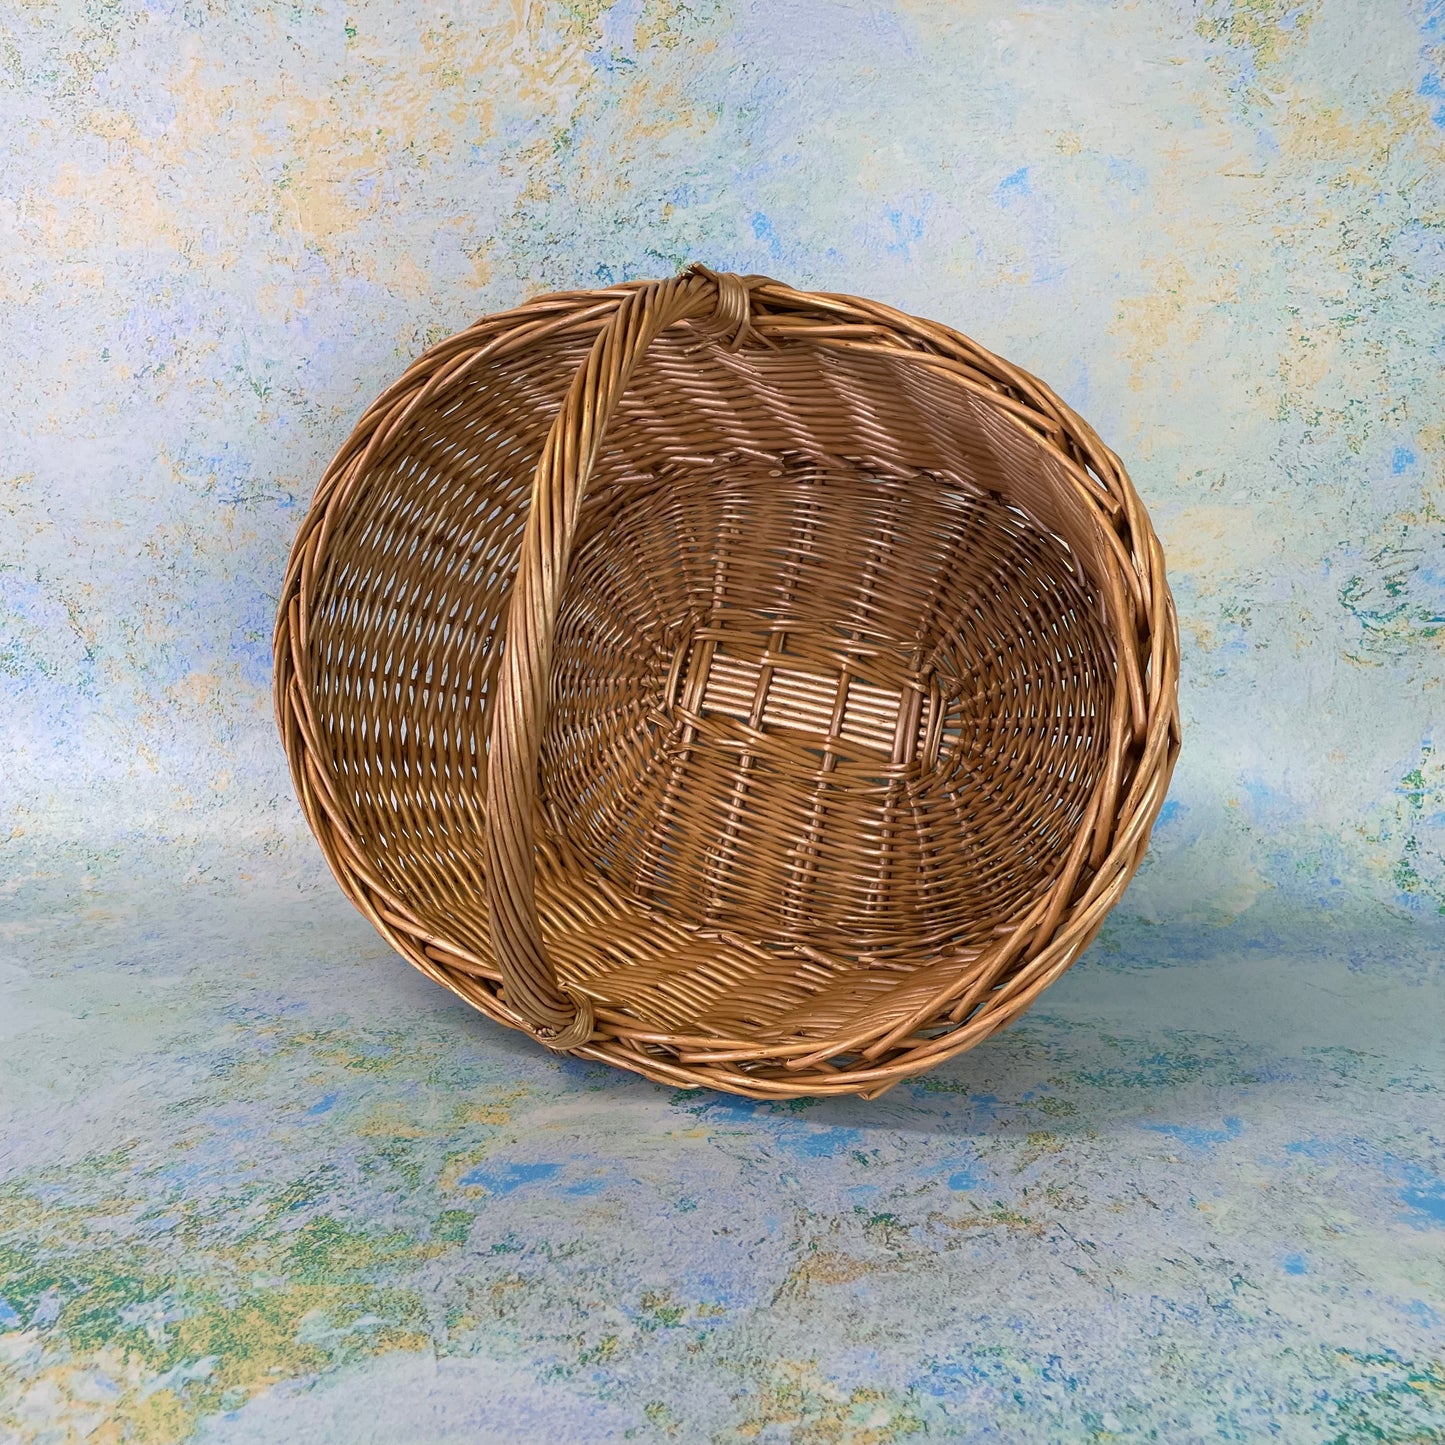 Country Woven Shopping Basket